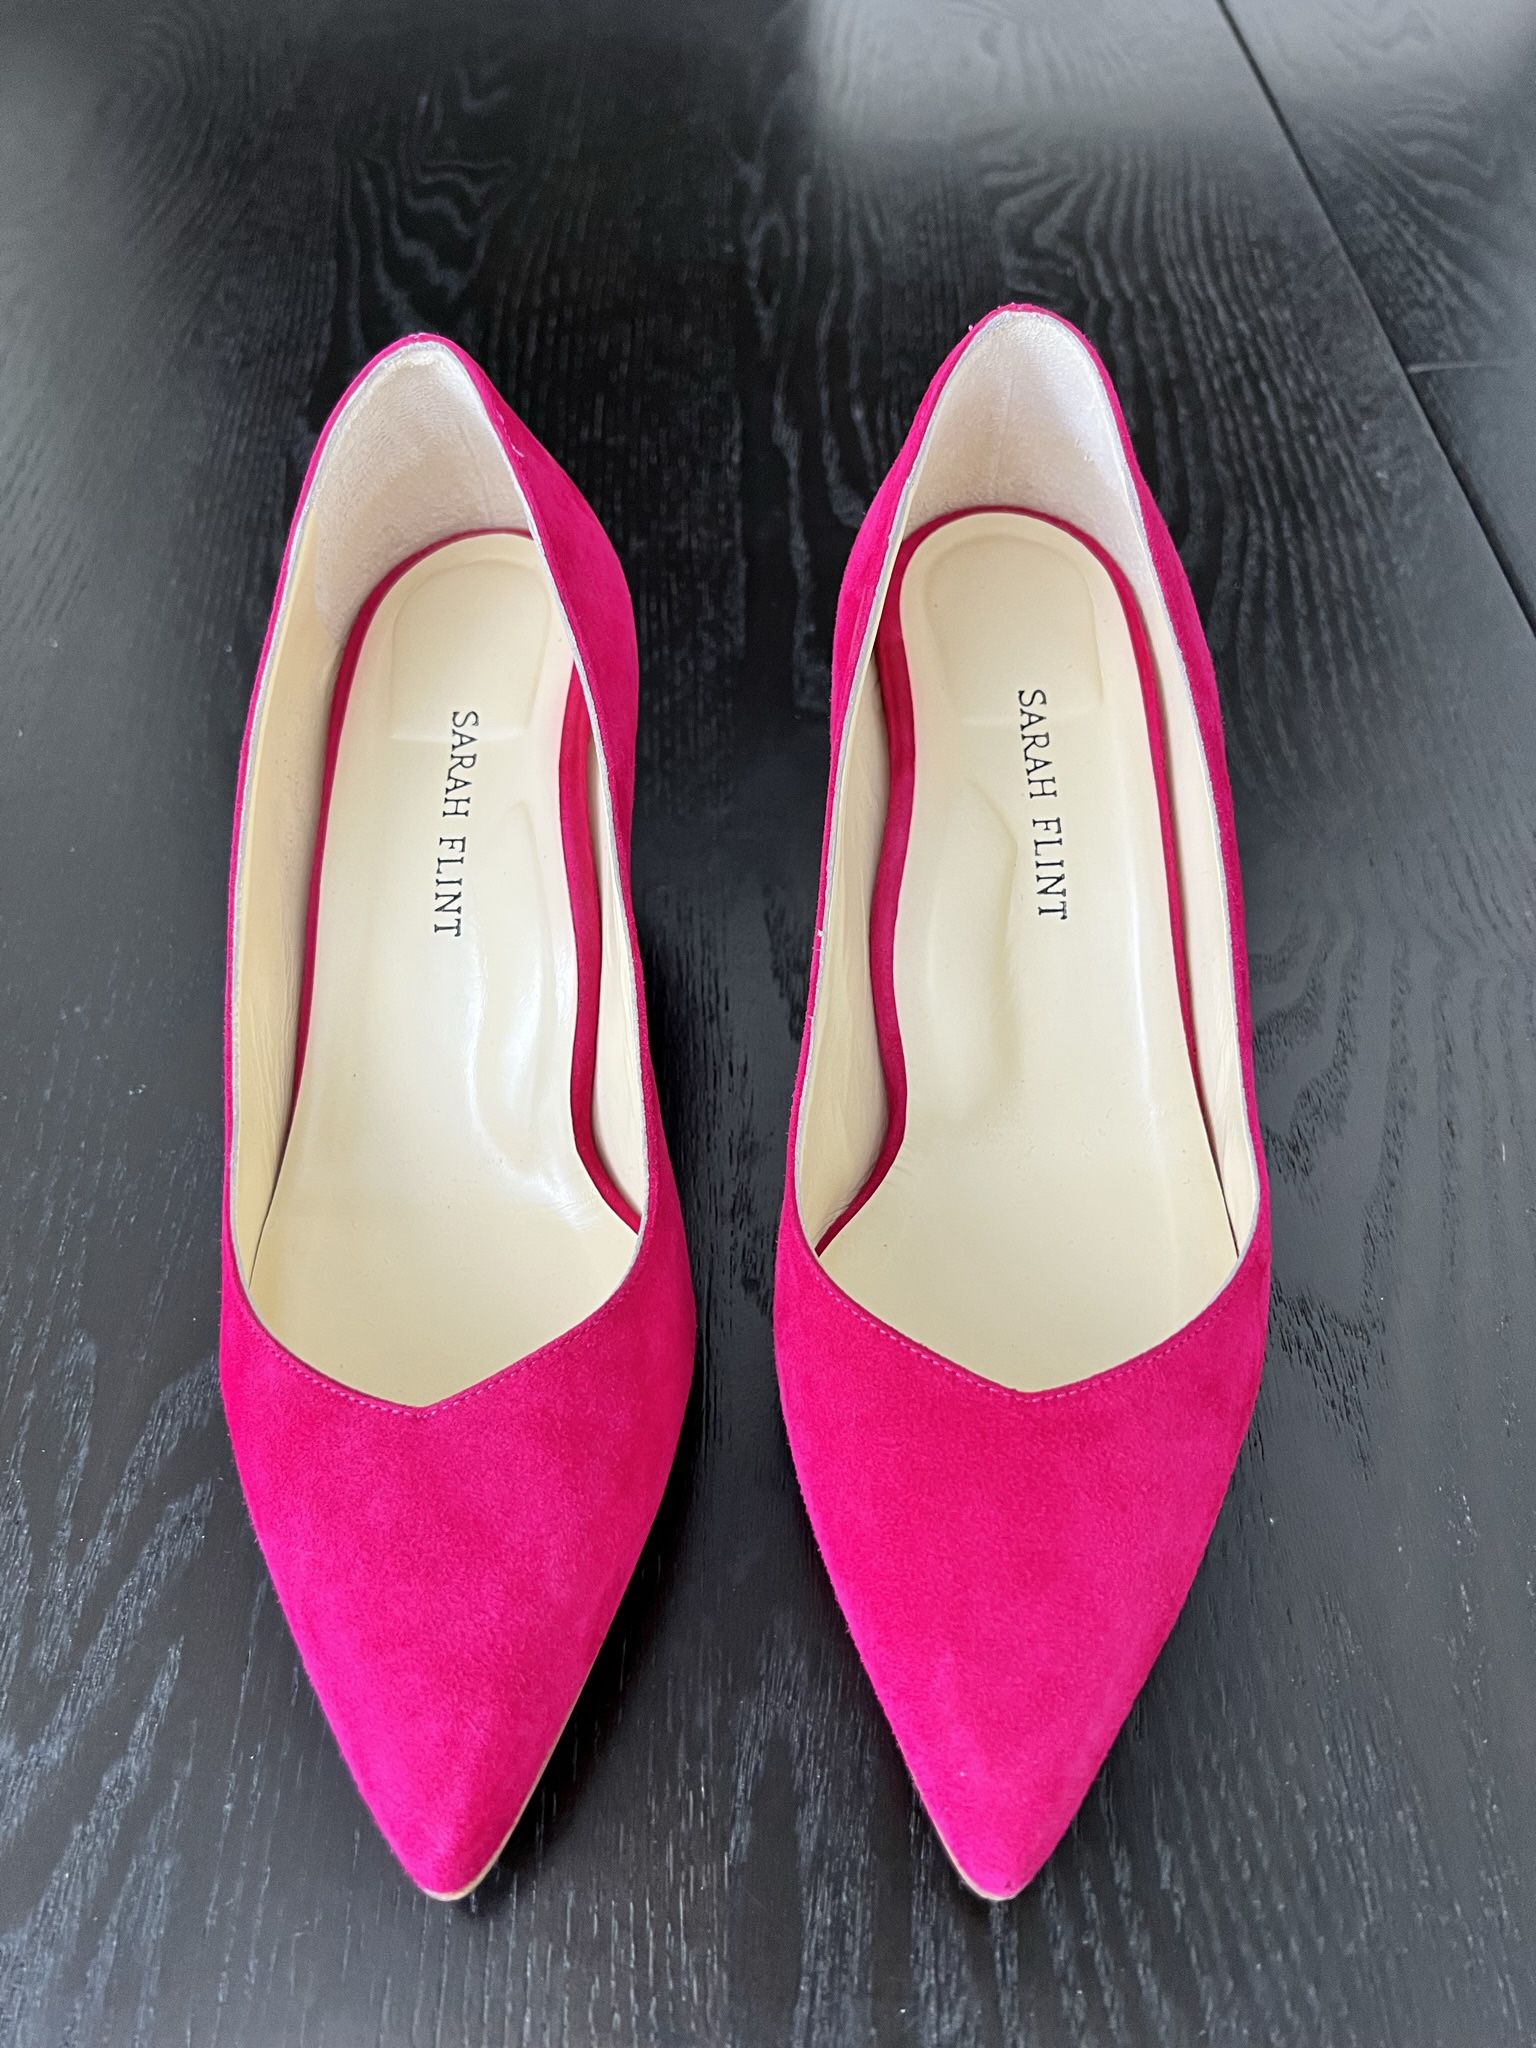 Sarah Flint perfect pump in “pomegranate suede”; size  37.5 (7.5 US)